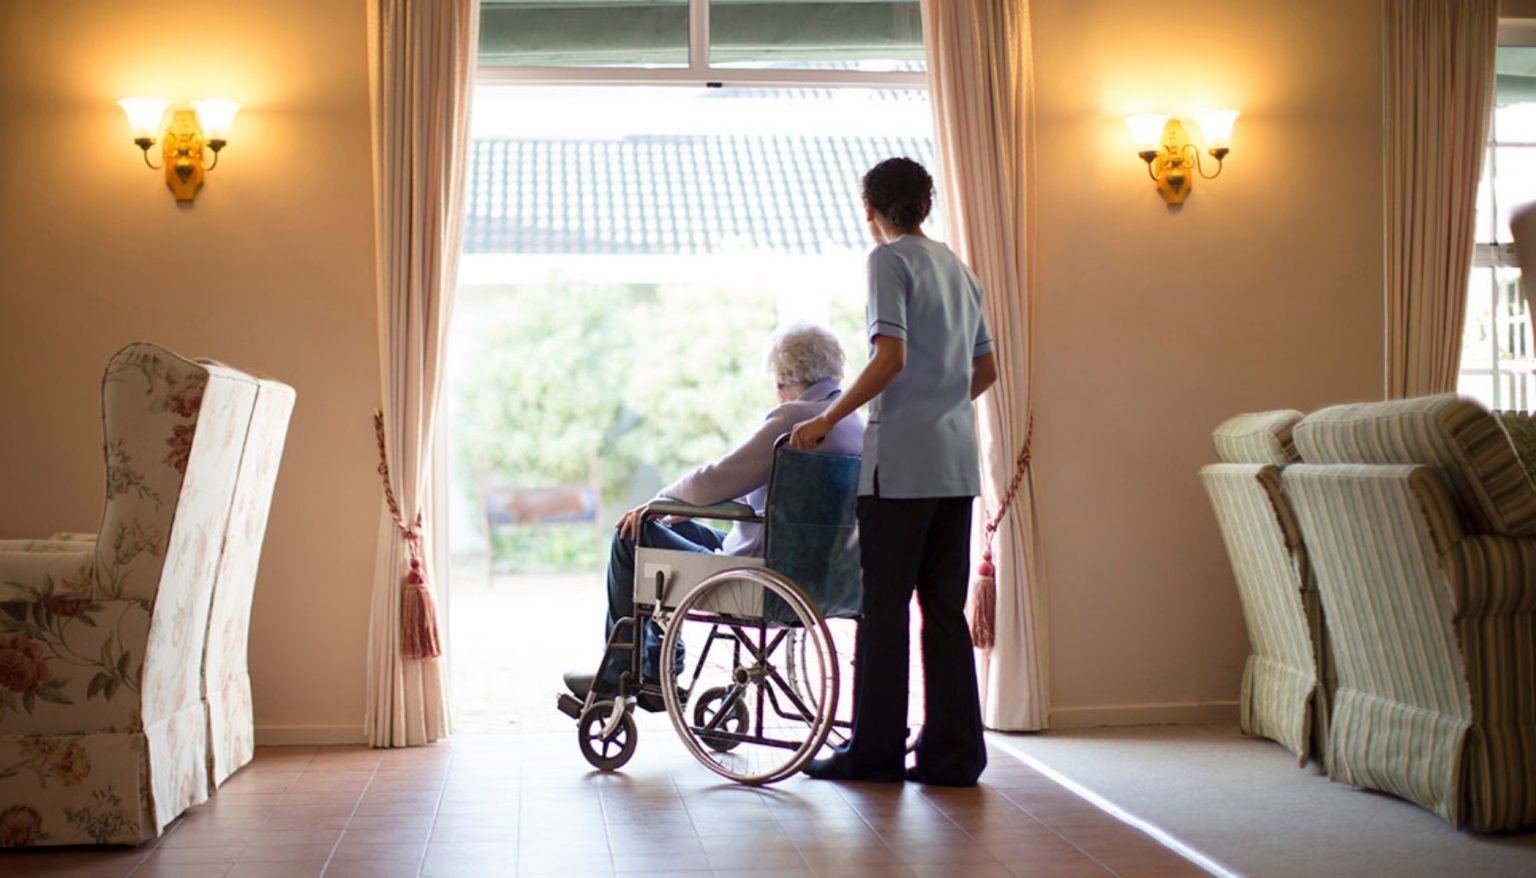 are old age homes good or bad